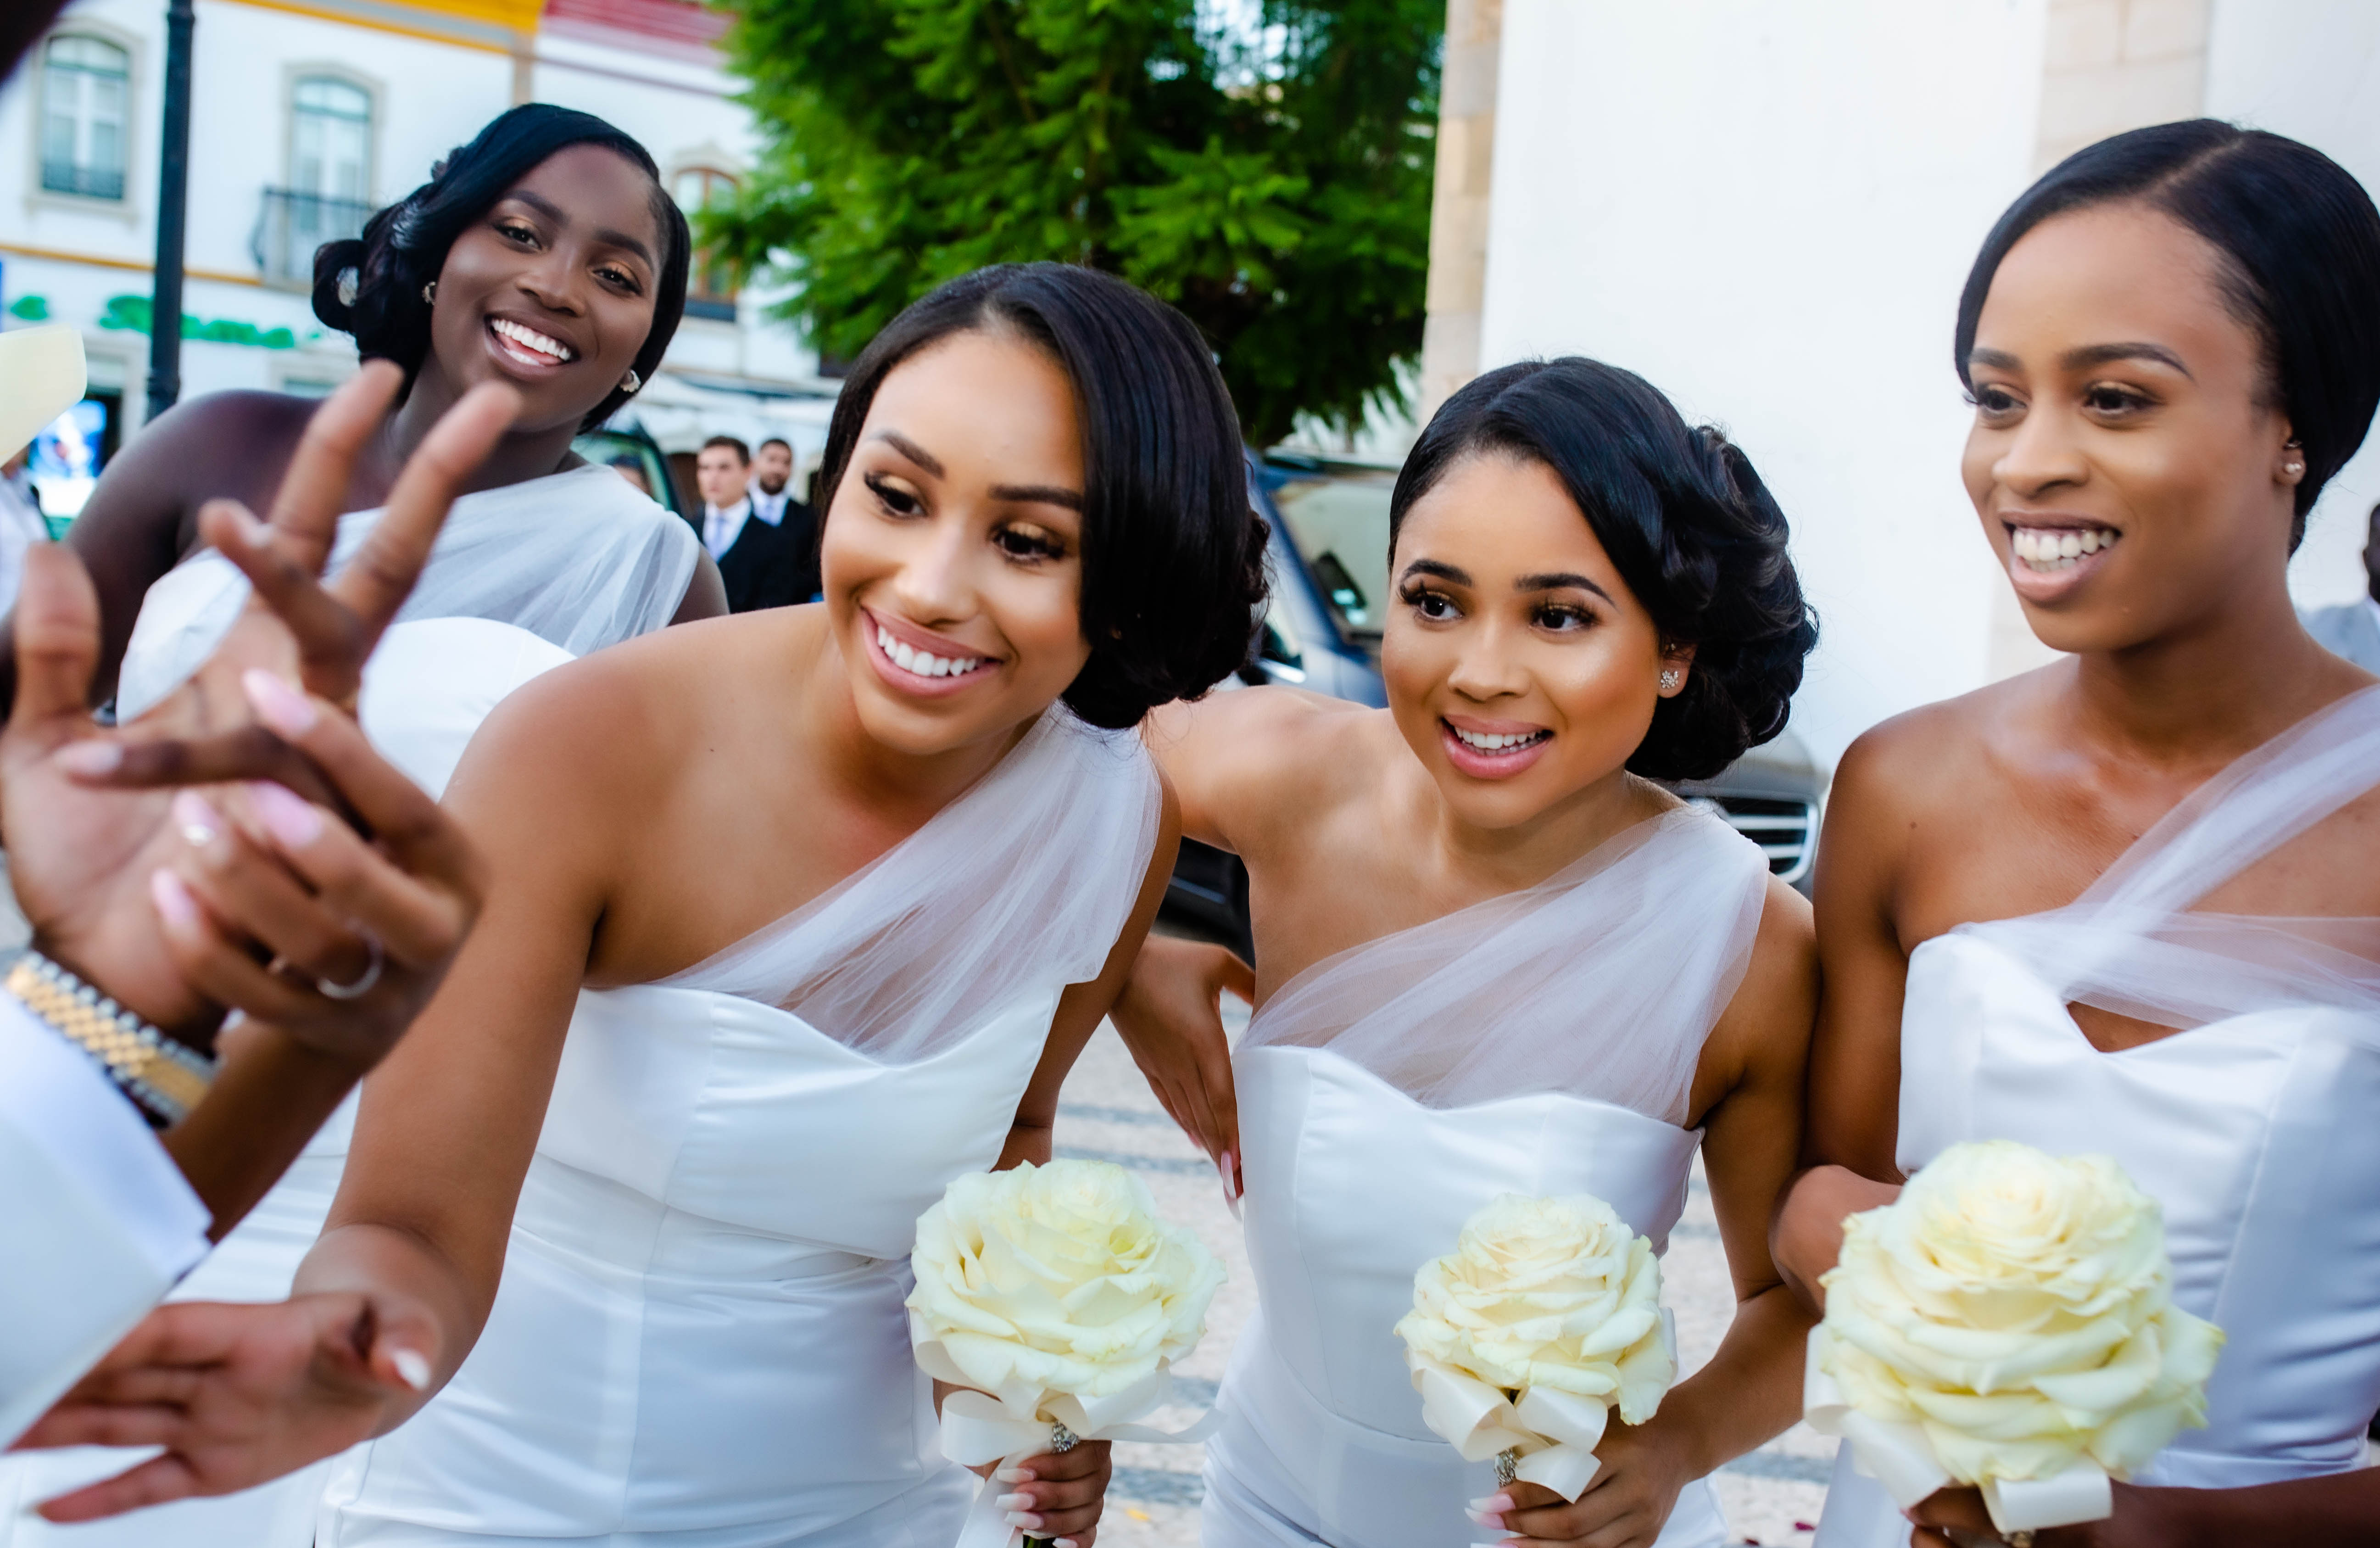 Top 35 Black Wedding Vendors and Black-Owned Businesses to Support